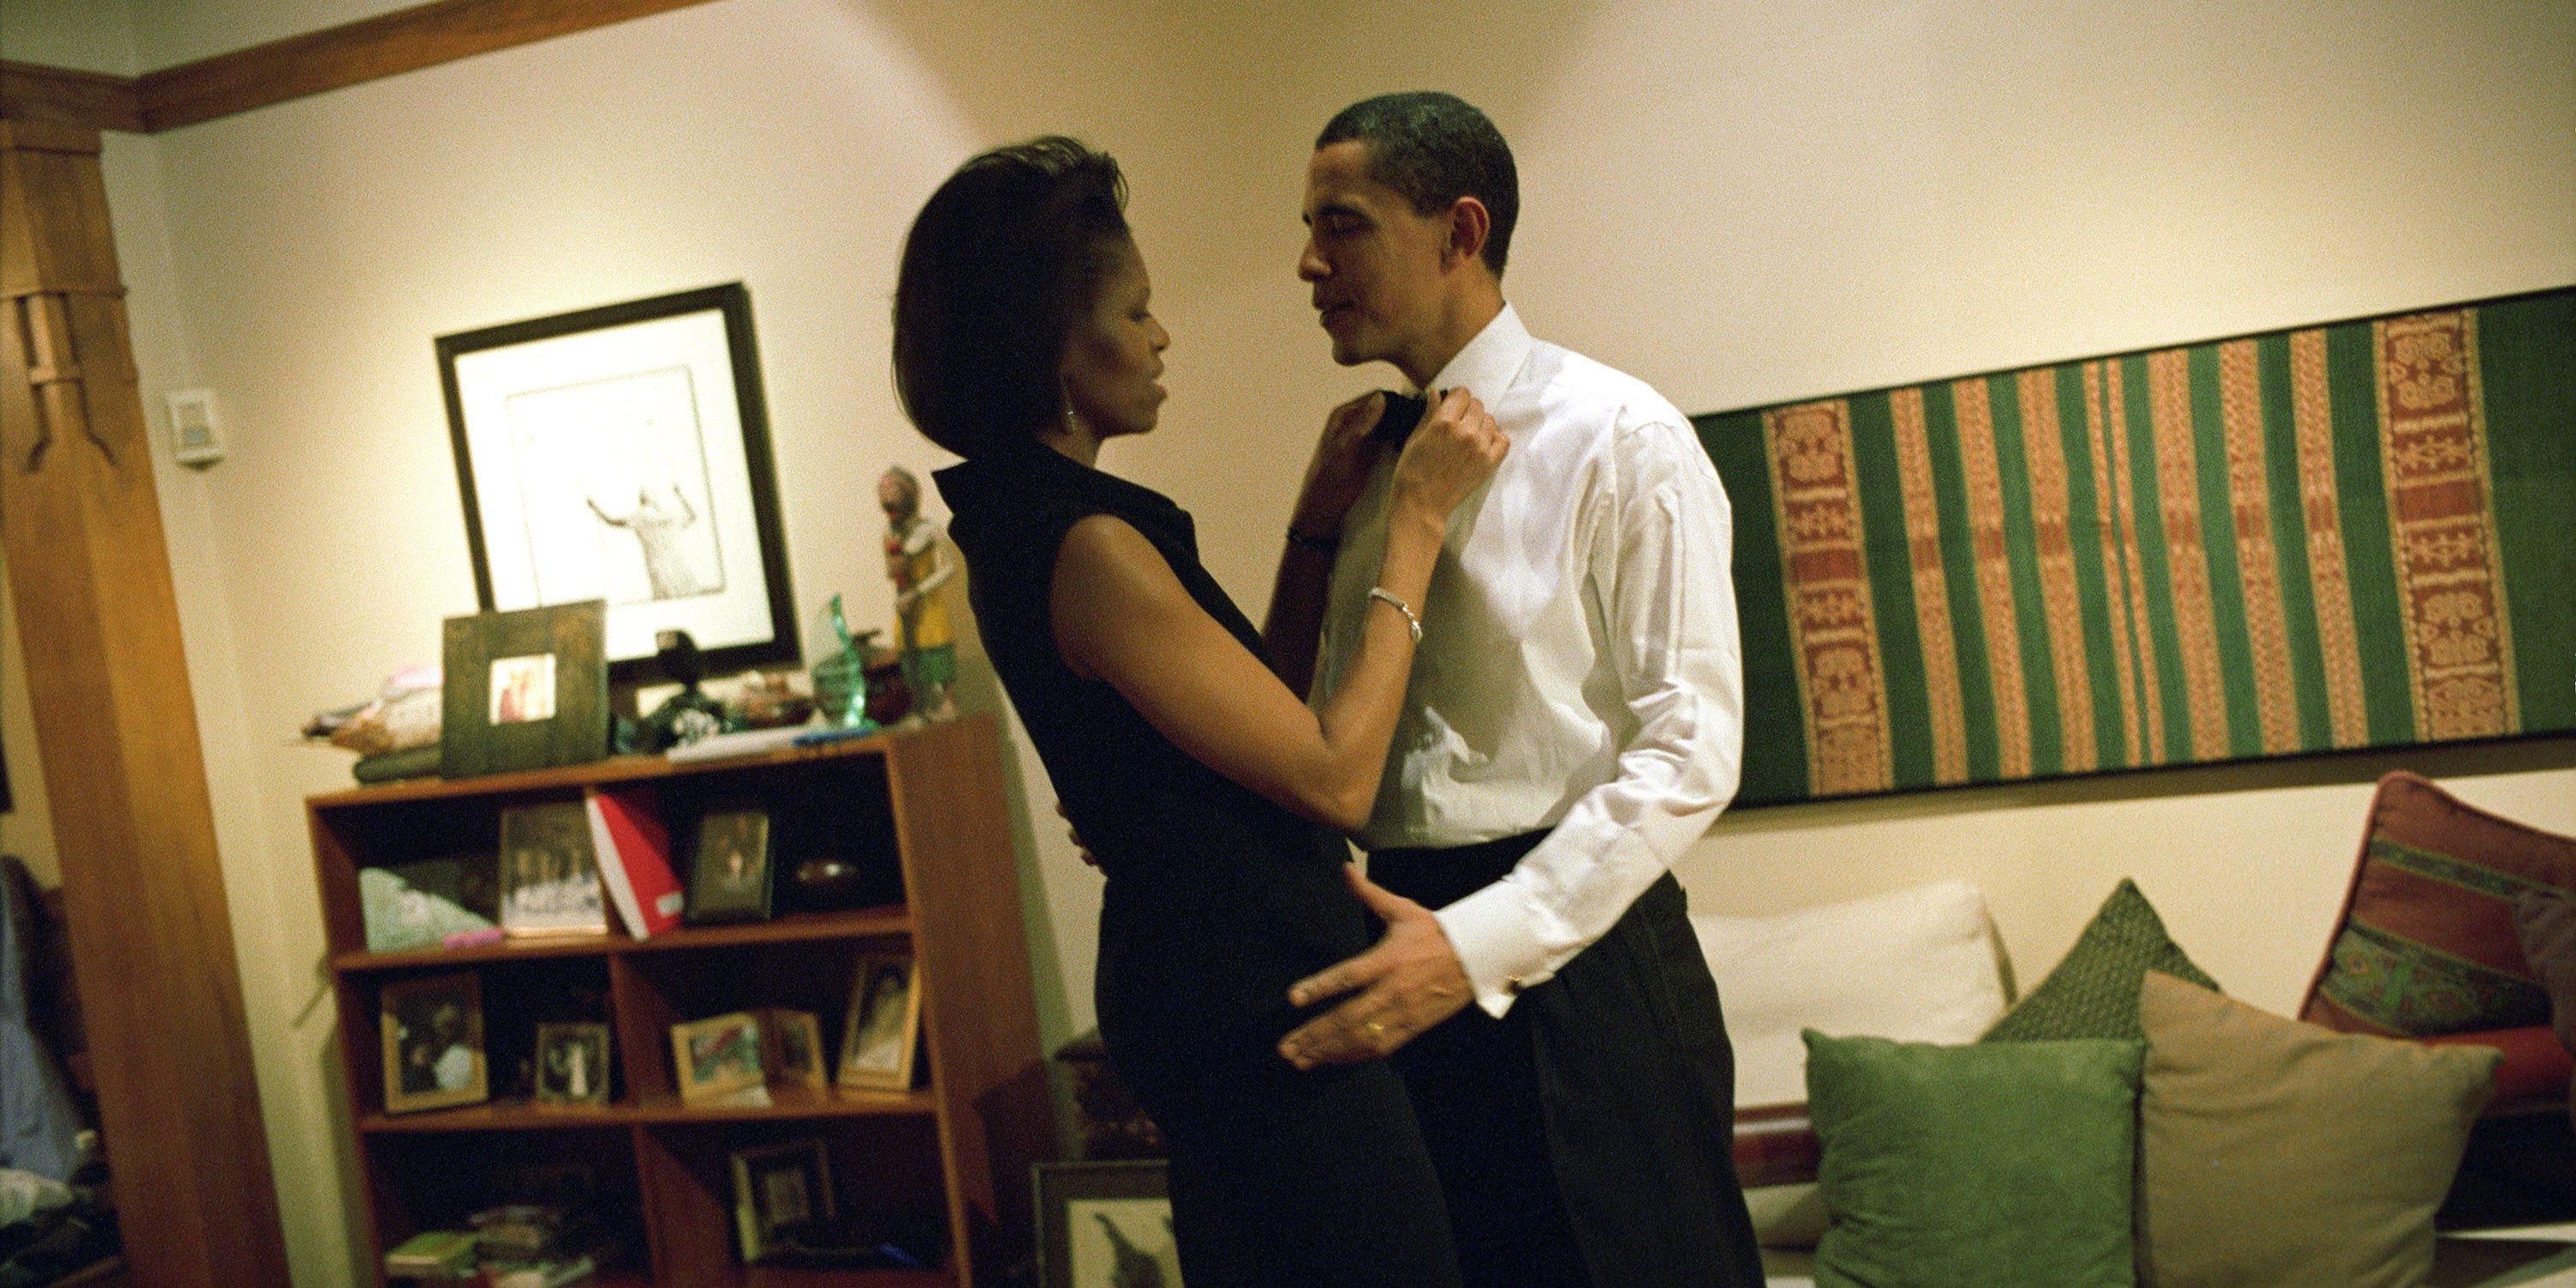 Barack and Michelle Obama's Sweetest Moments in Photo